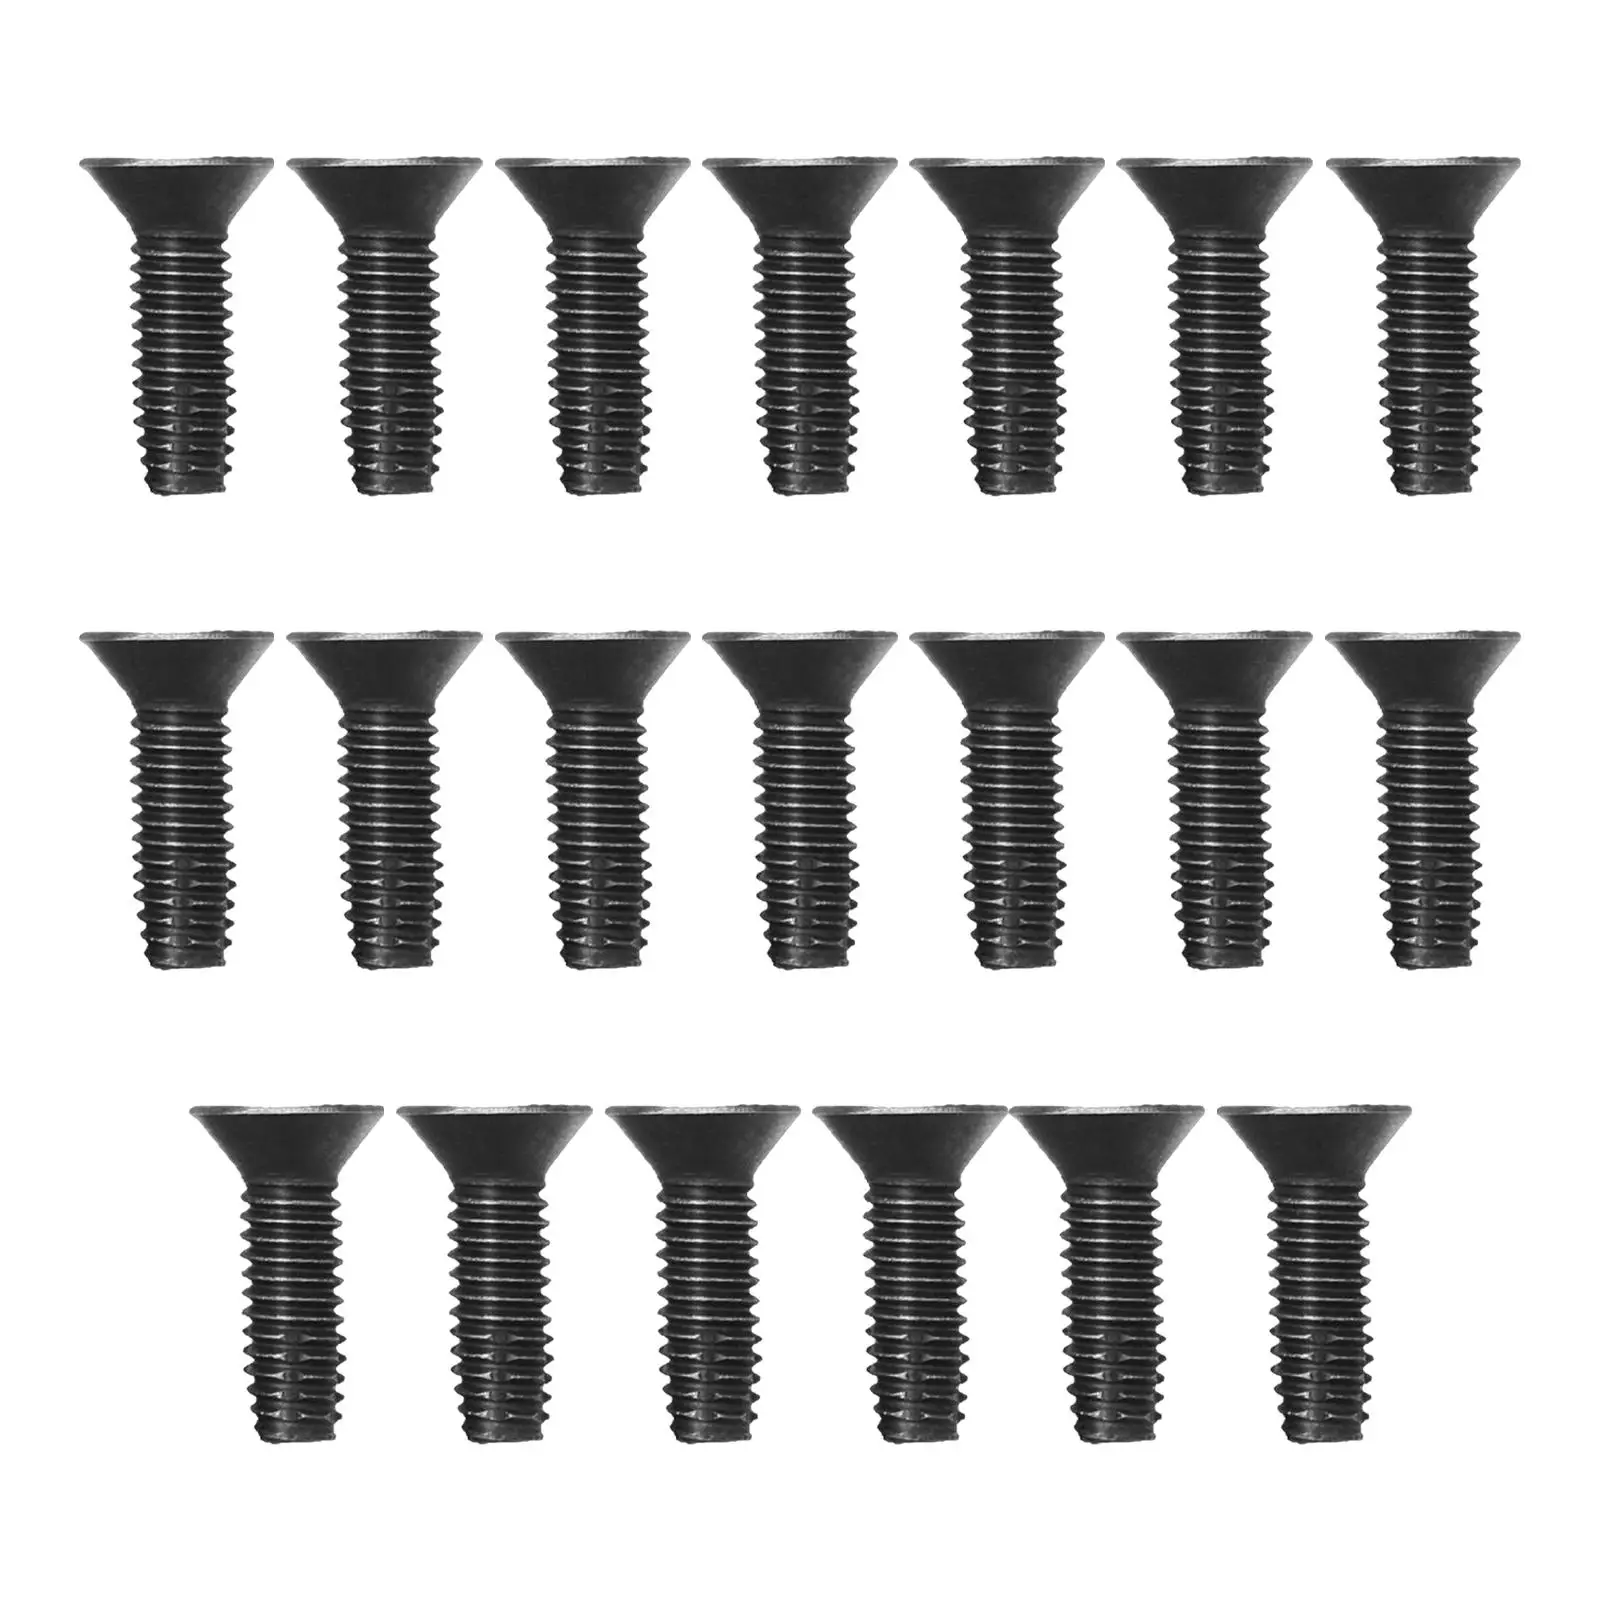 20 Pieces Hinge Screws Bolts Car Supplies Vehicle Parts Iron Tailgate Screws for Wranglers Yj TJ Car Doors Soft Top